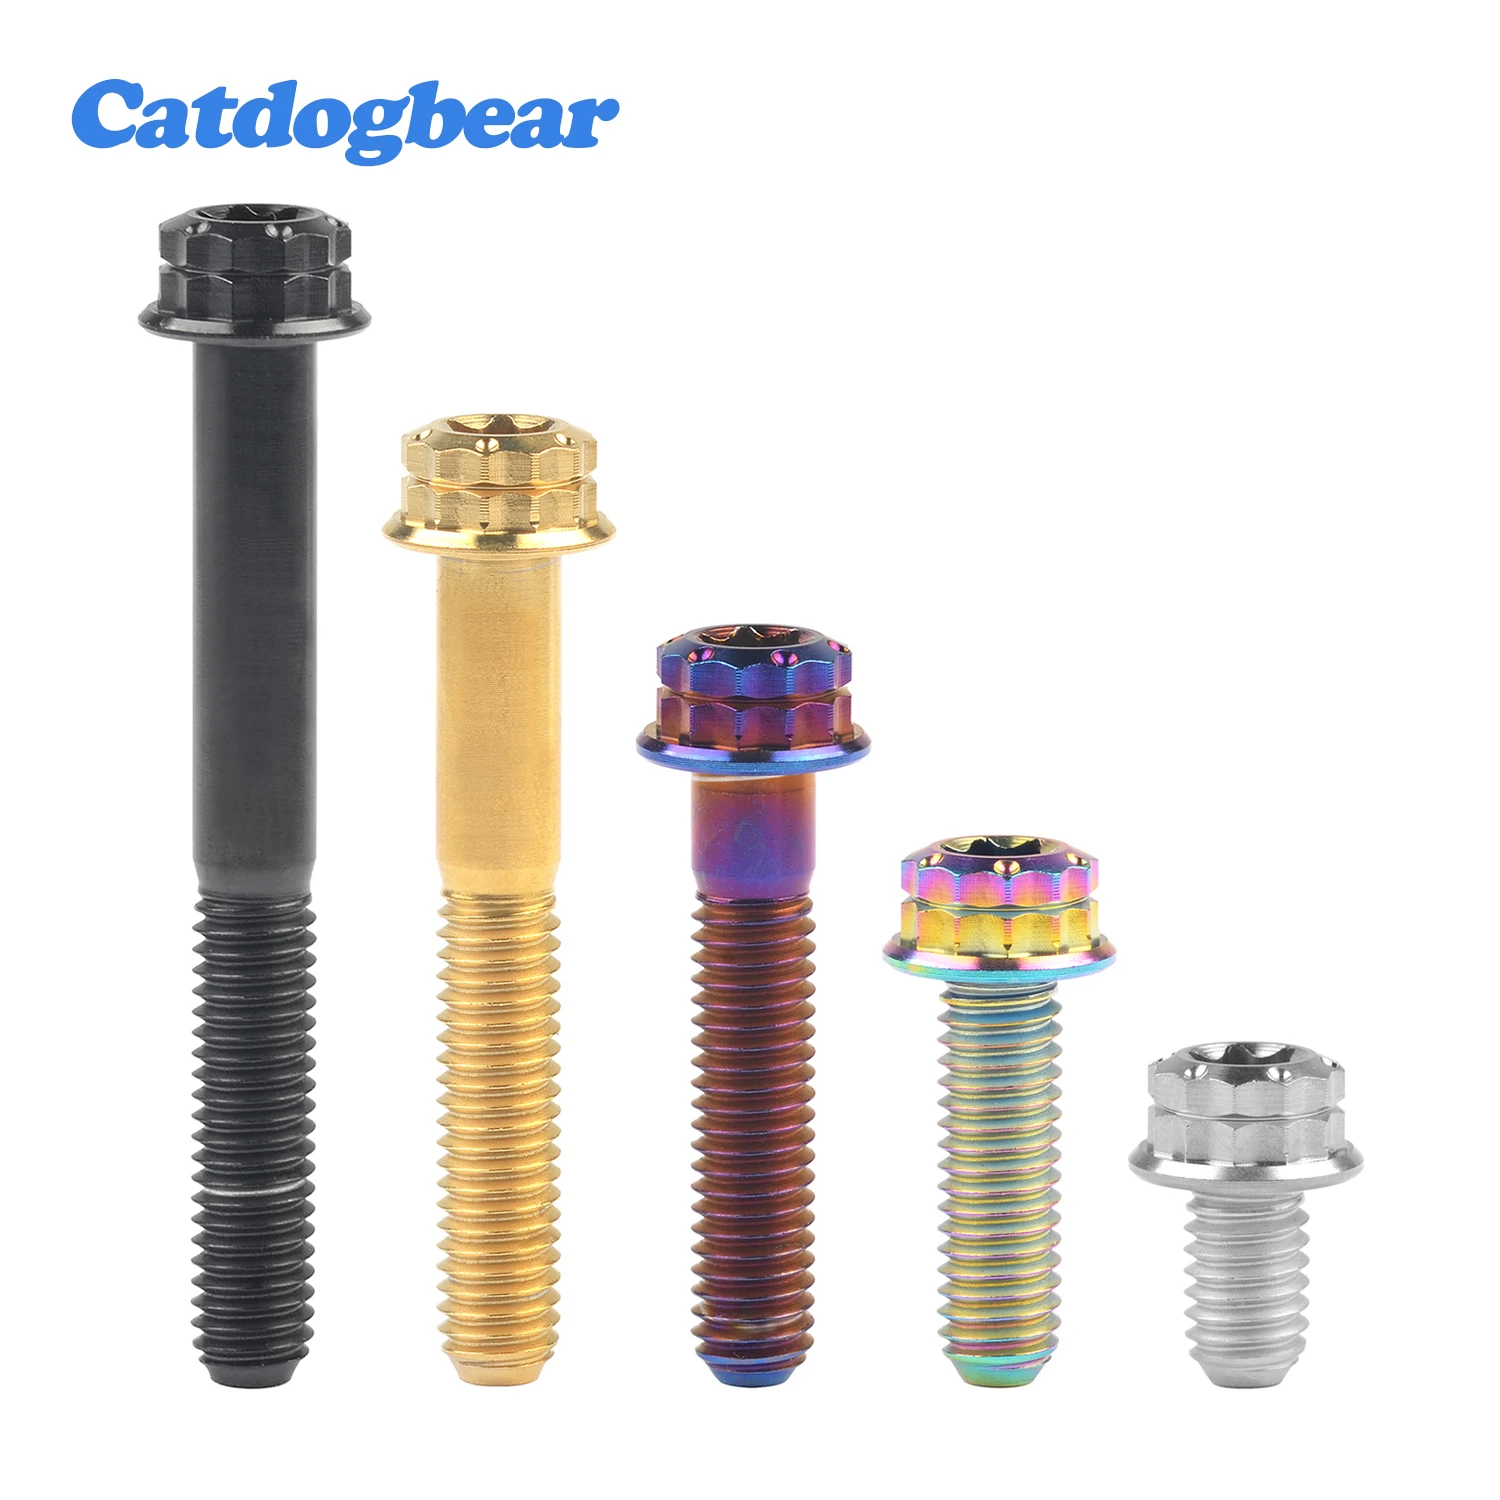 

Catdogbear Titanium Bolt M6x10 15 20 25 30 35 40 45 50mm 12 Points Flange Head Torx 30 Automobile And Motorcycle Screw